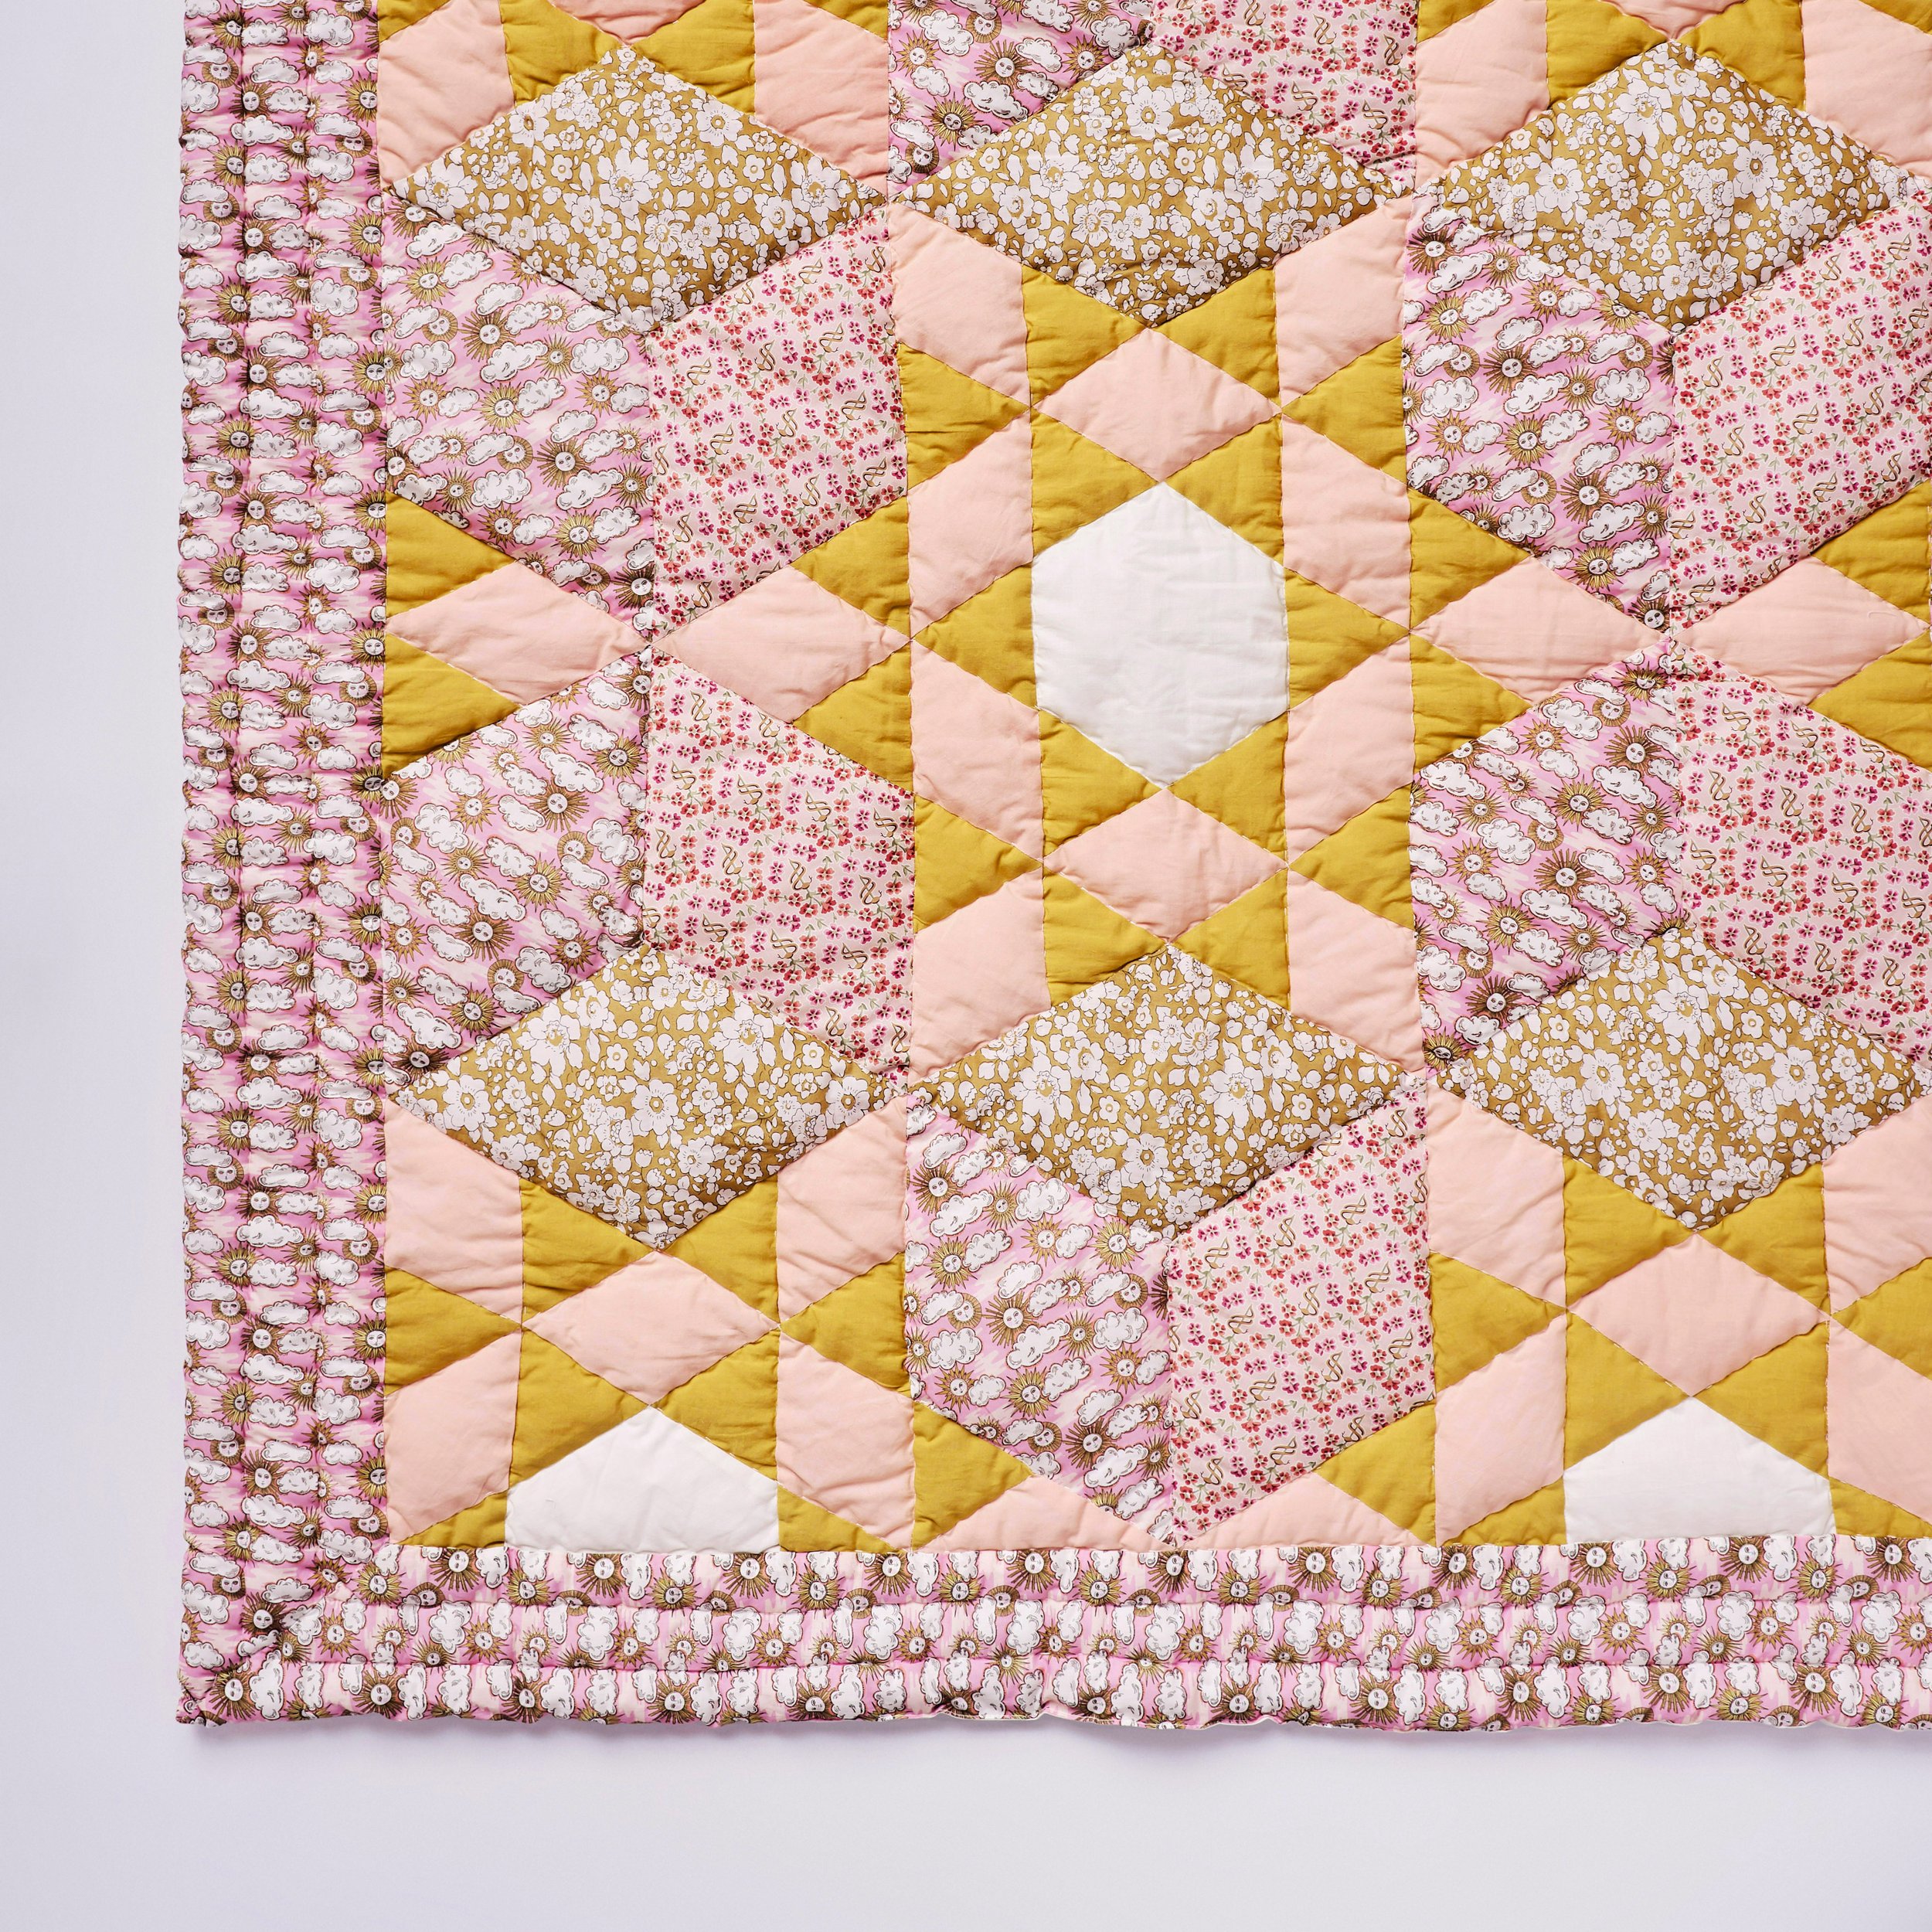 Follow the Sun 'made with Liberty' patchwork quilt — Projektityyny